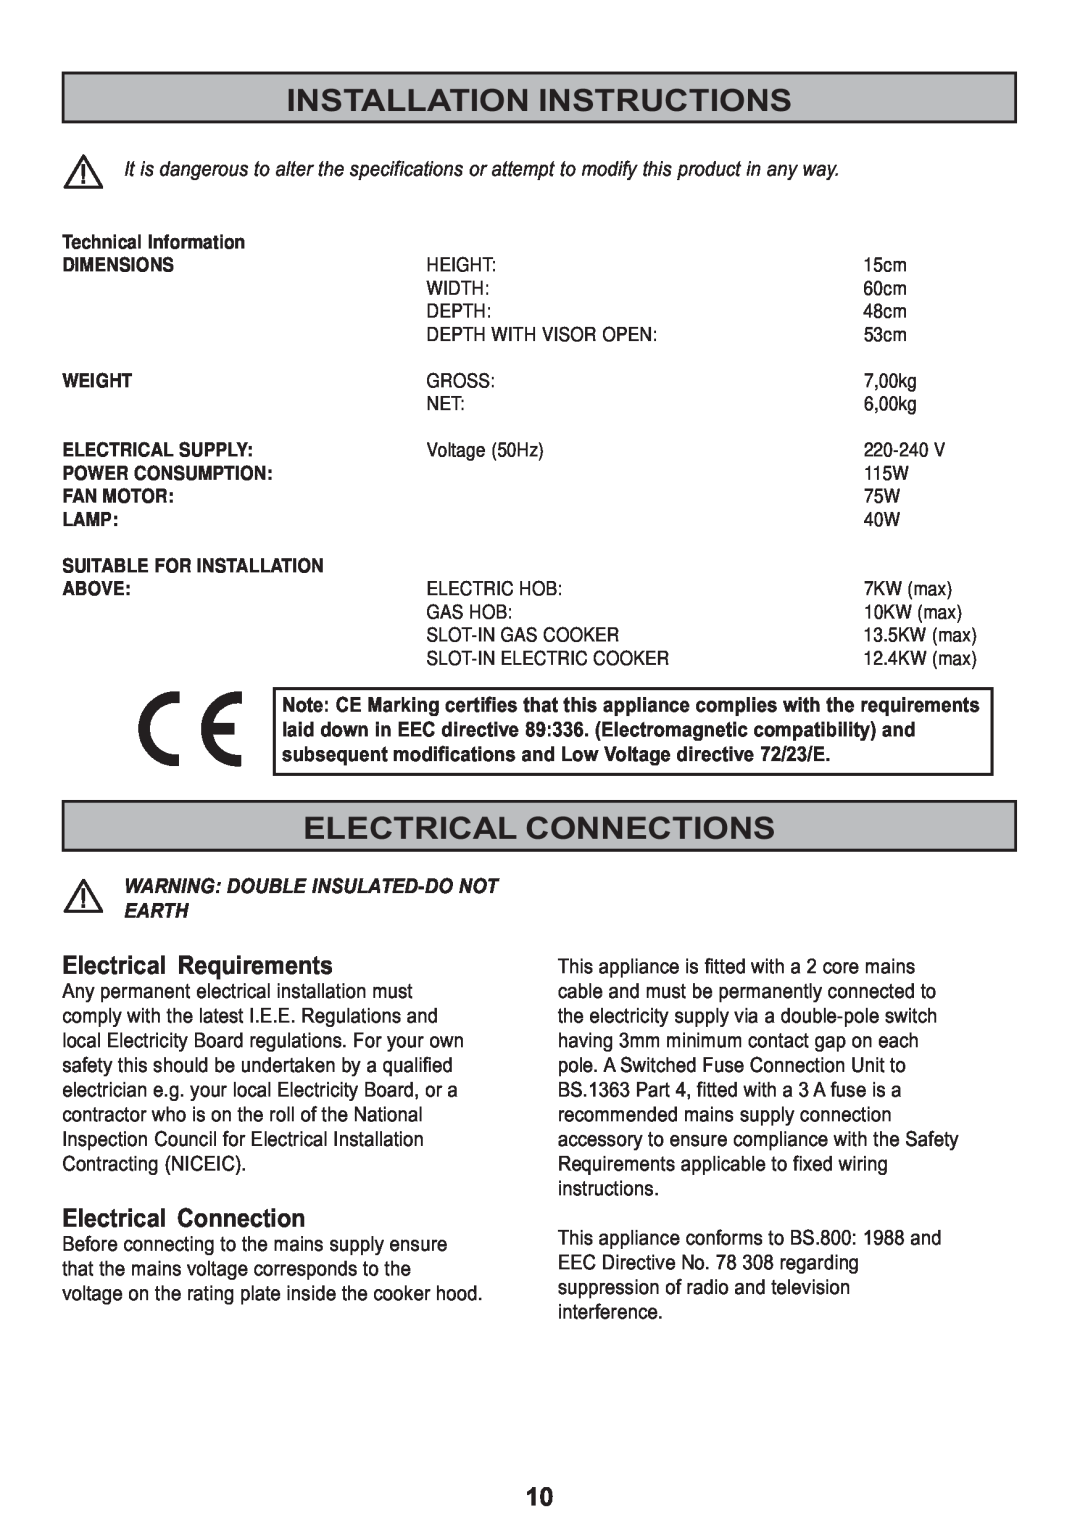 Tricity Bendix TBH 630 manual Installation Instructions, Electrical Connections, Electrical Requirements 